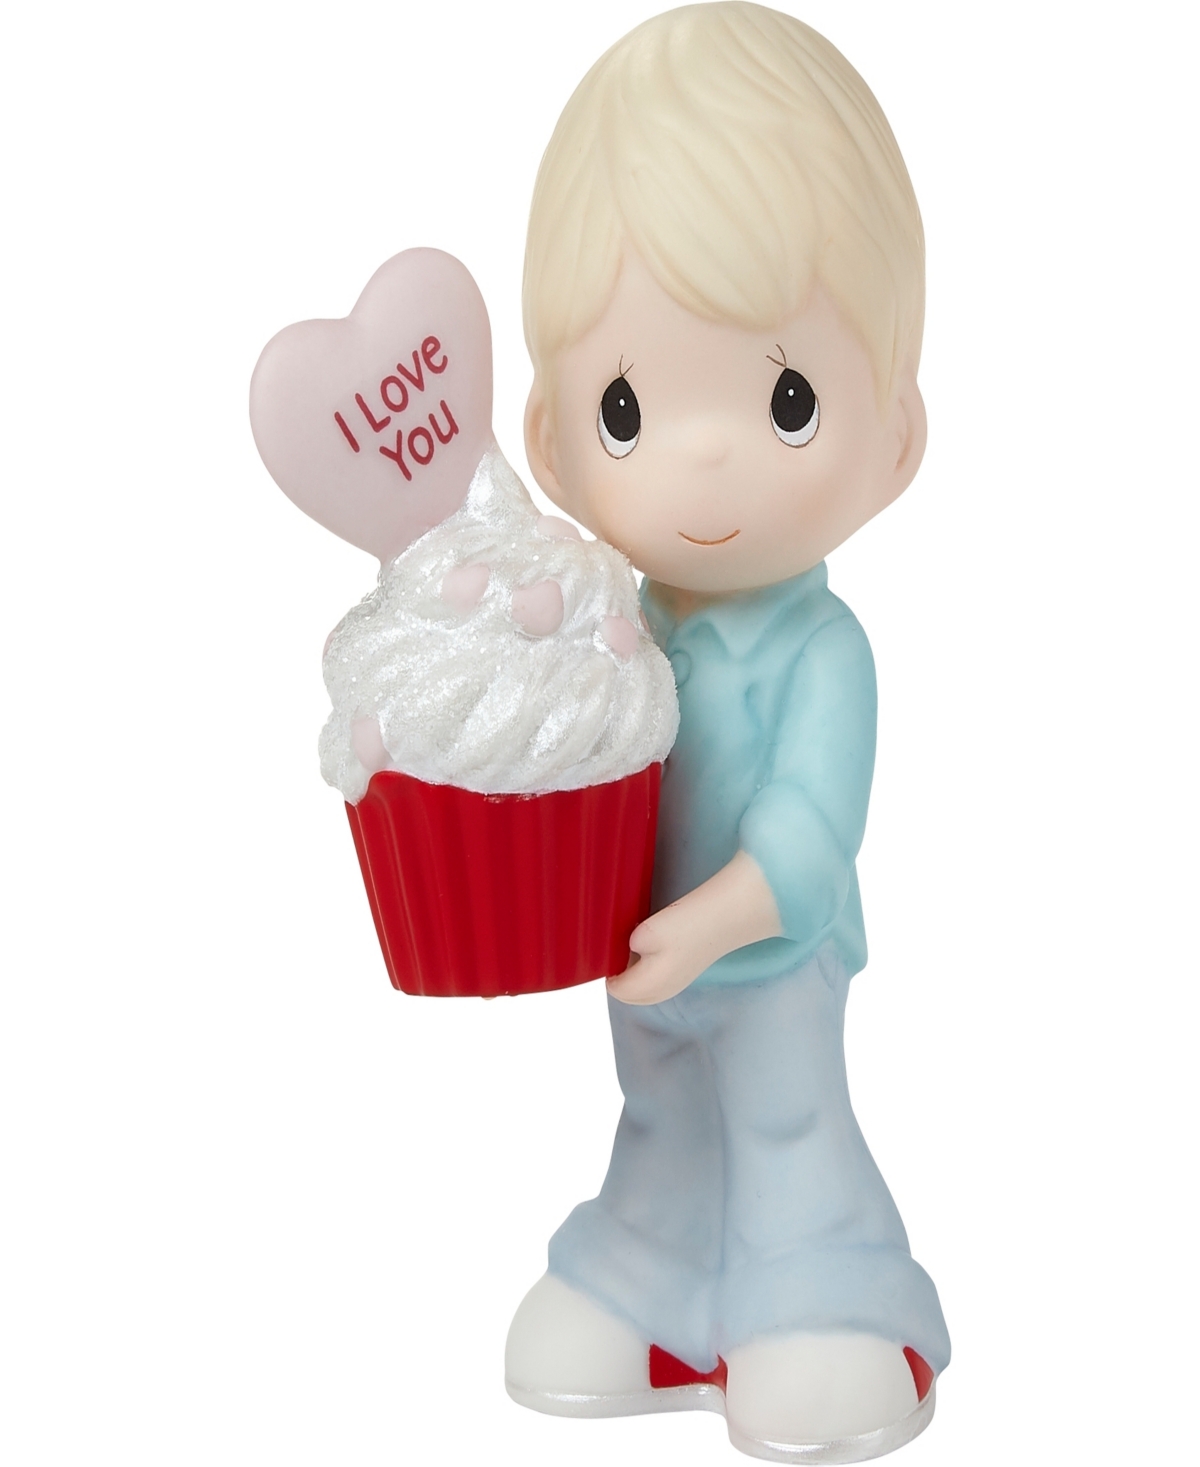 Precious Moments 222002 You Bake Me Happy Blond Boy Porcelain Figurine In Multicolored